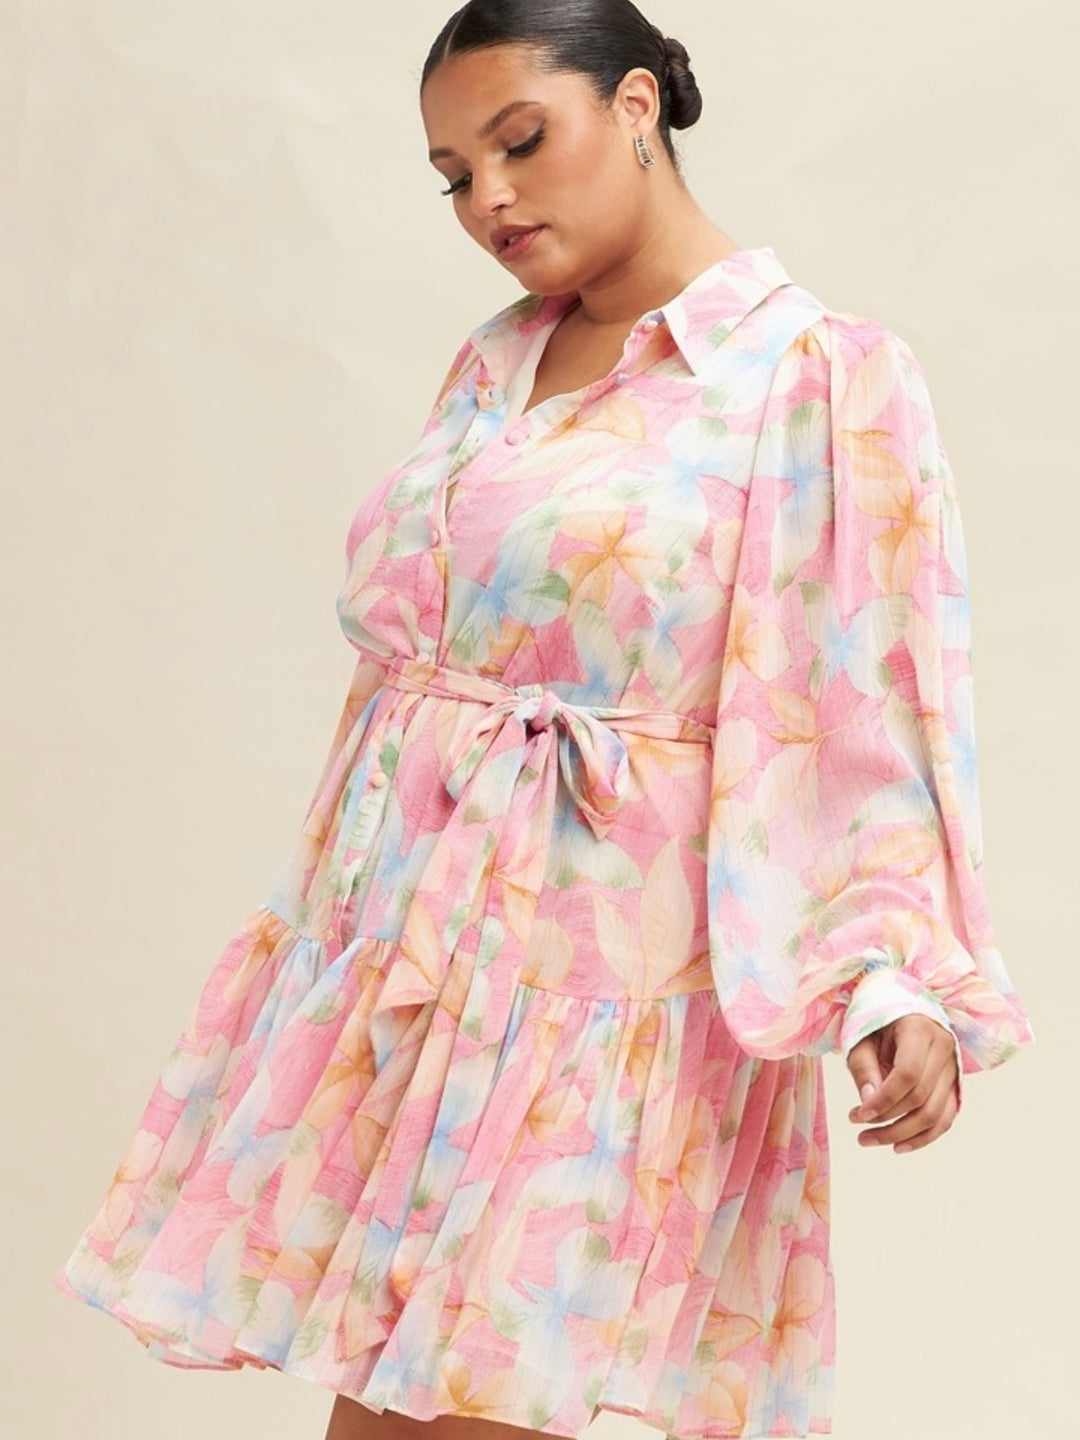 Floral Button Up Dress (Pink Multi)